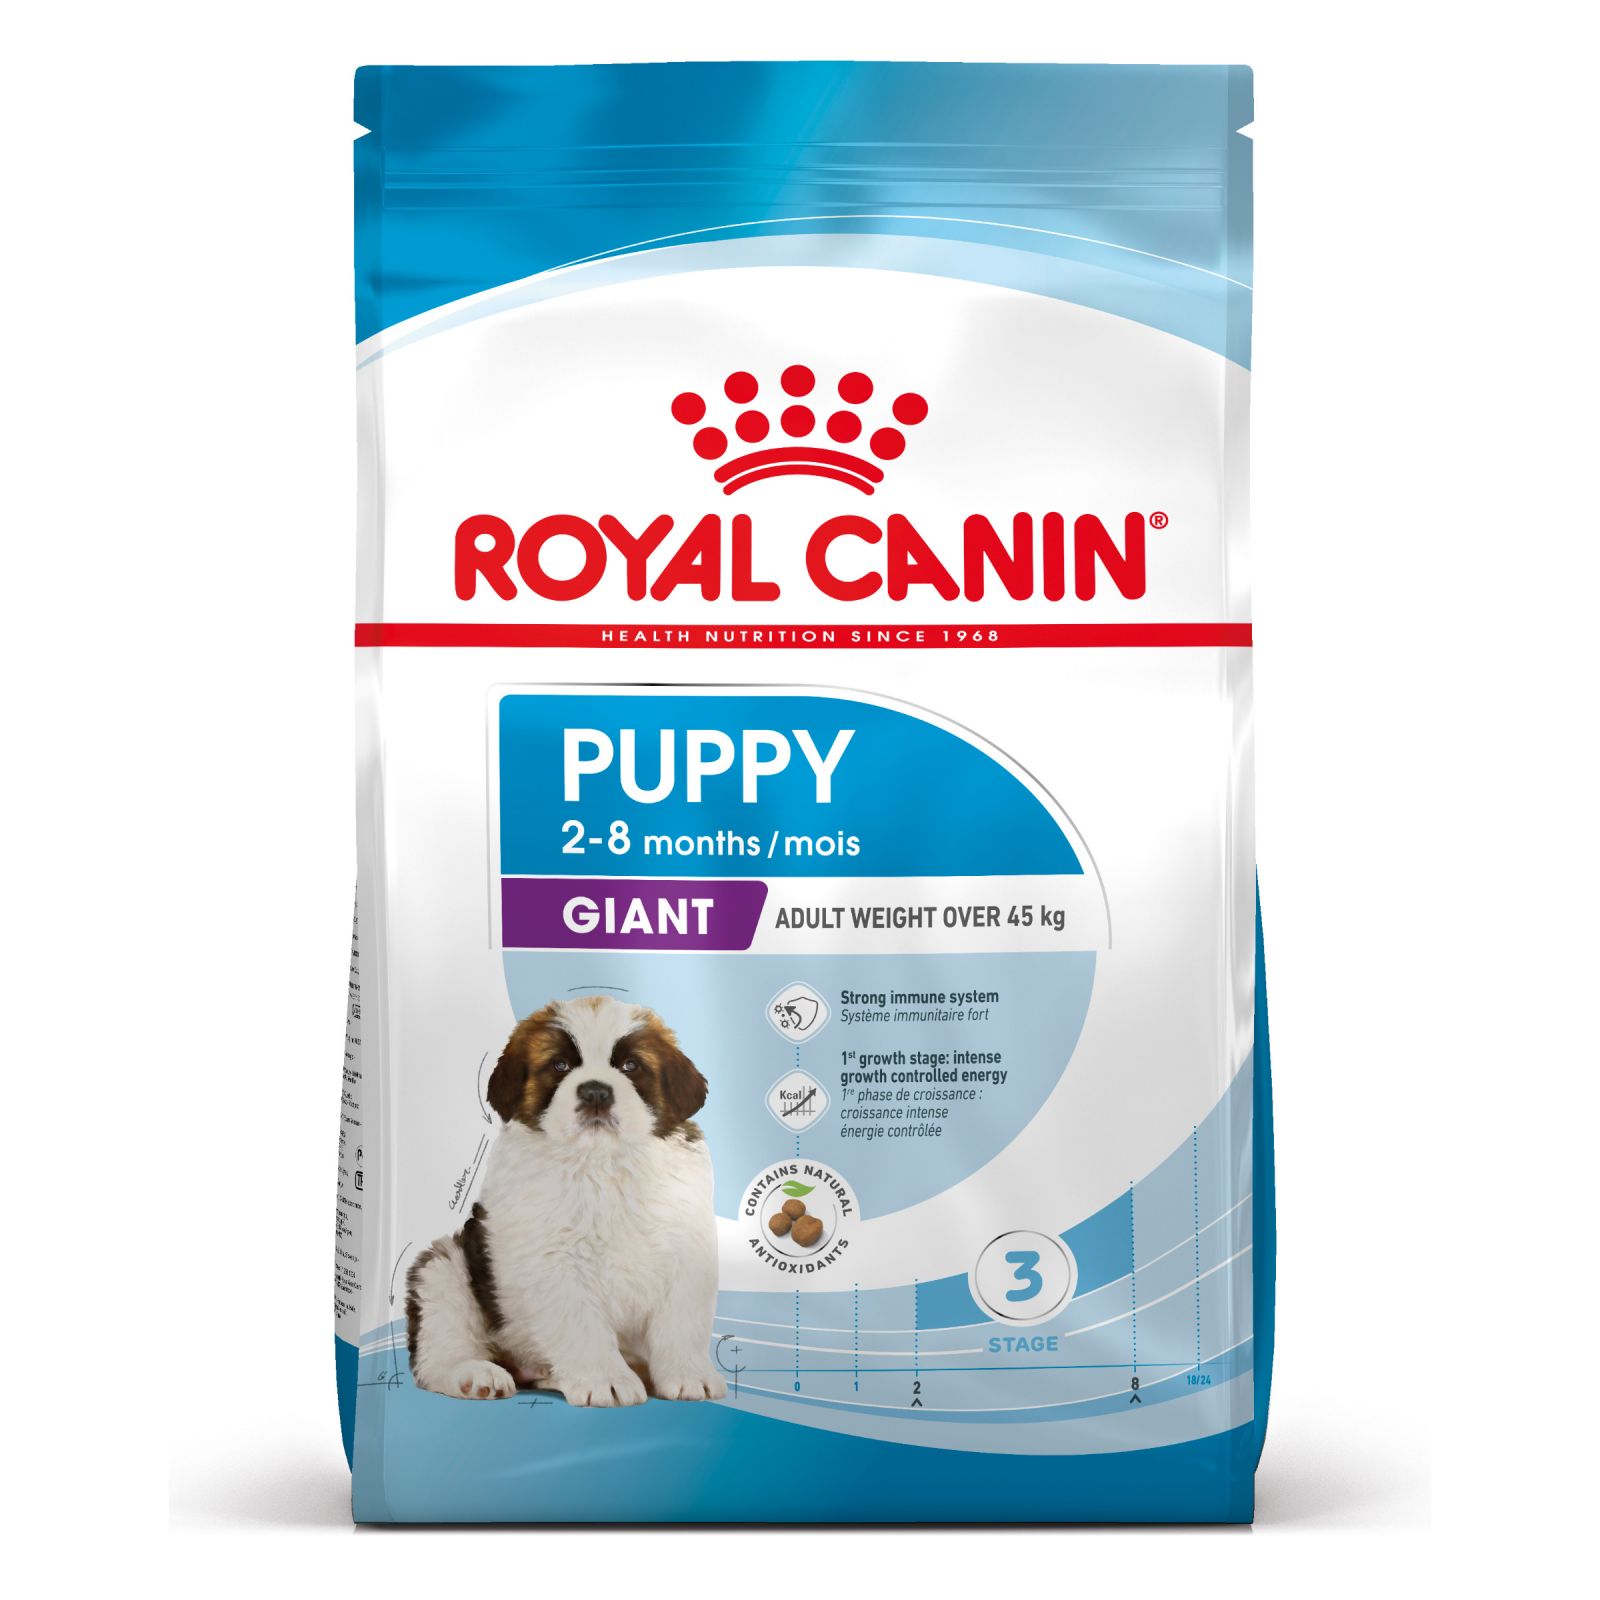 Royal Canin puppy giant 3.5 kg